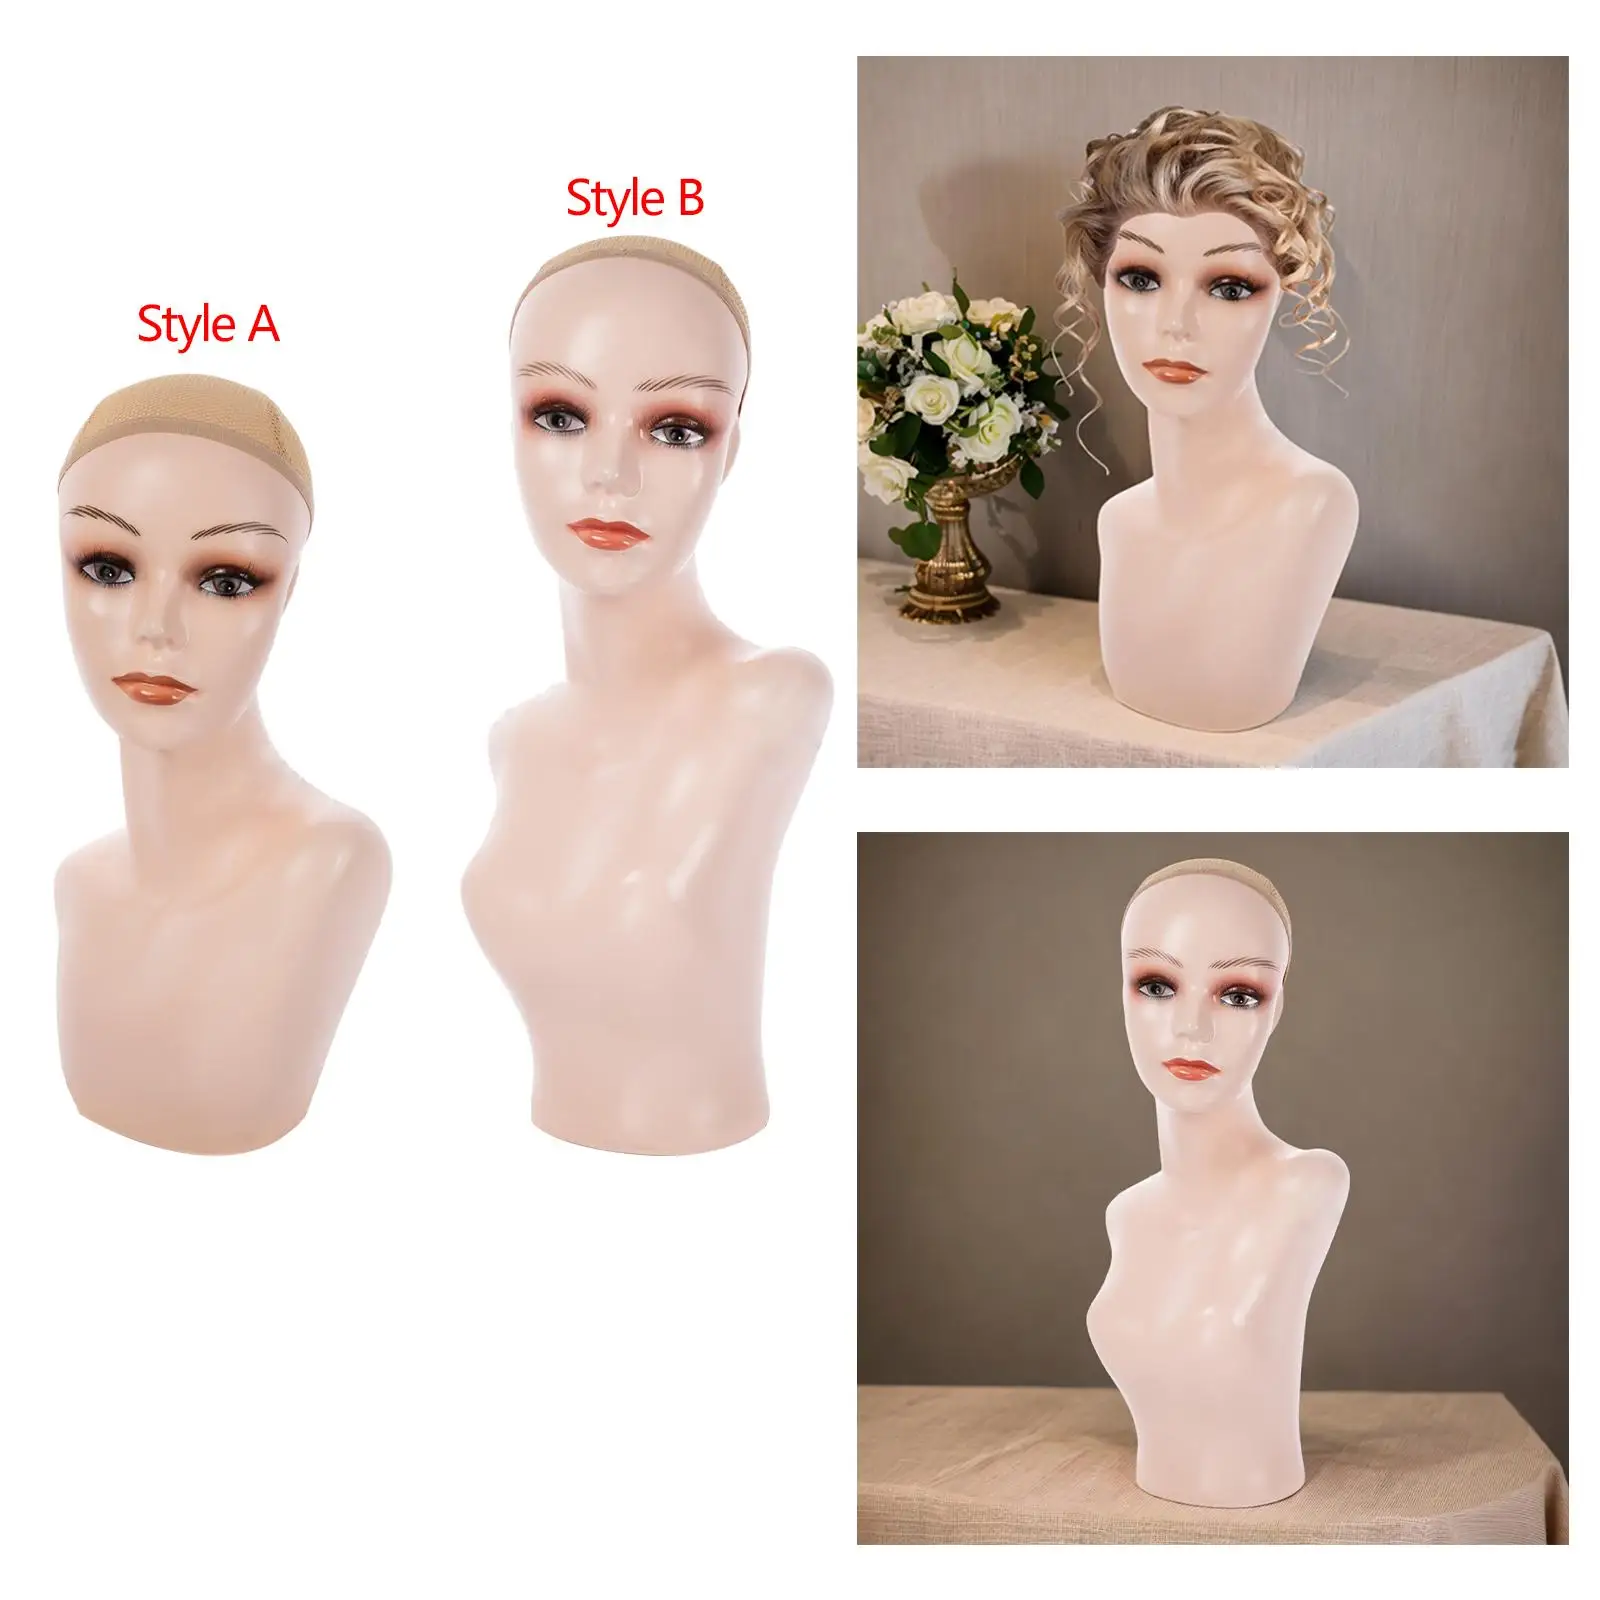 Female Mannequin Head Wig Holder Multipurpose Wig Display Model for Jewelry Necklace Wigs Displaying Making Styling Glasses Hats